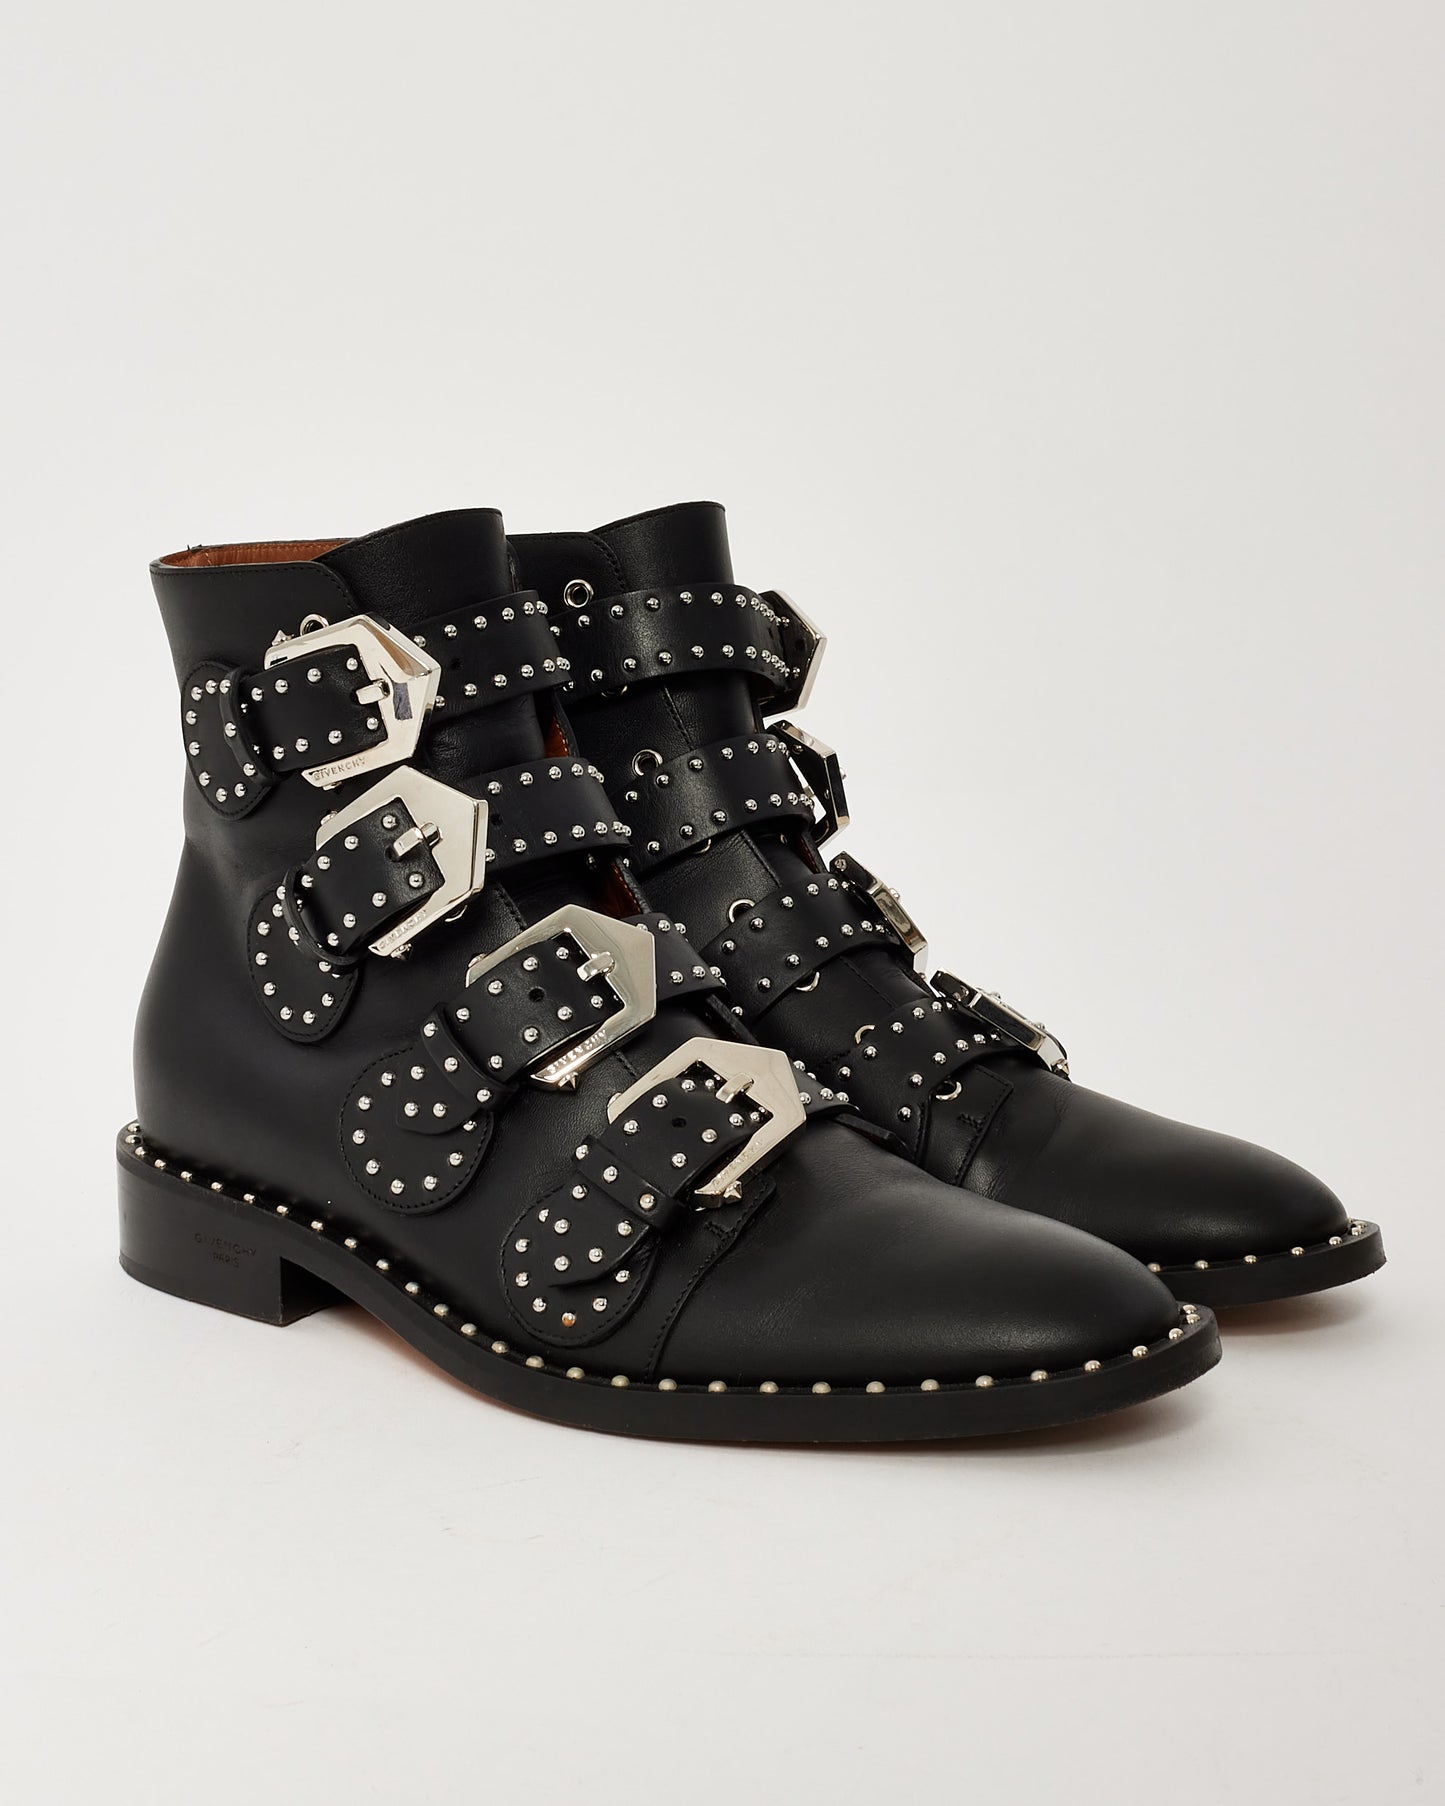 Givenchy Black Leather Studded Prue Buckle Bootie - 36